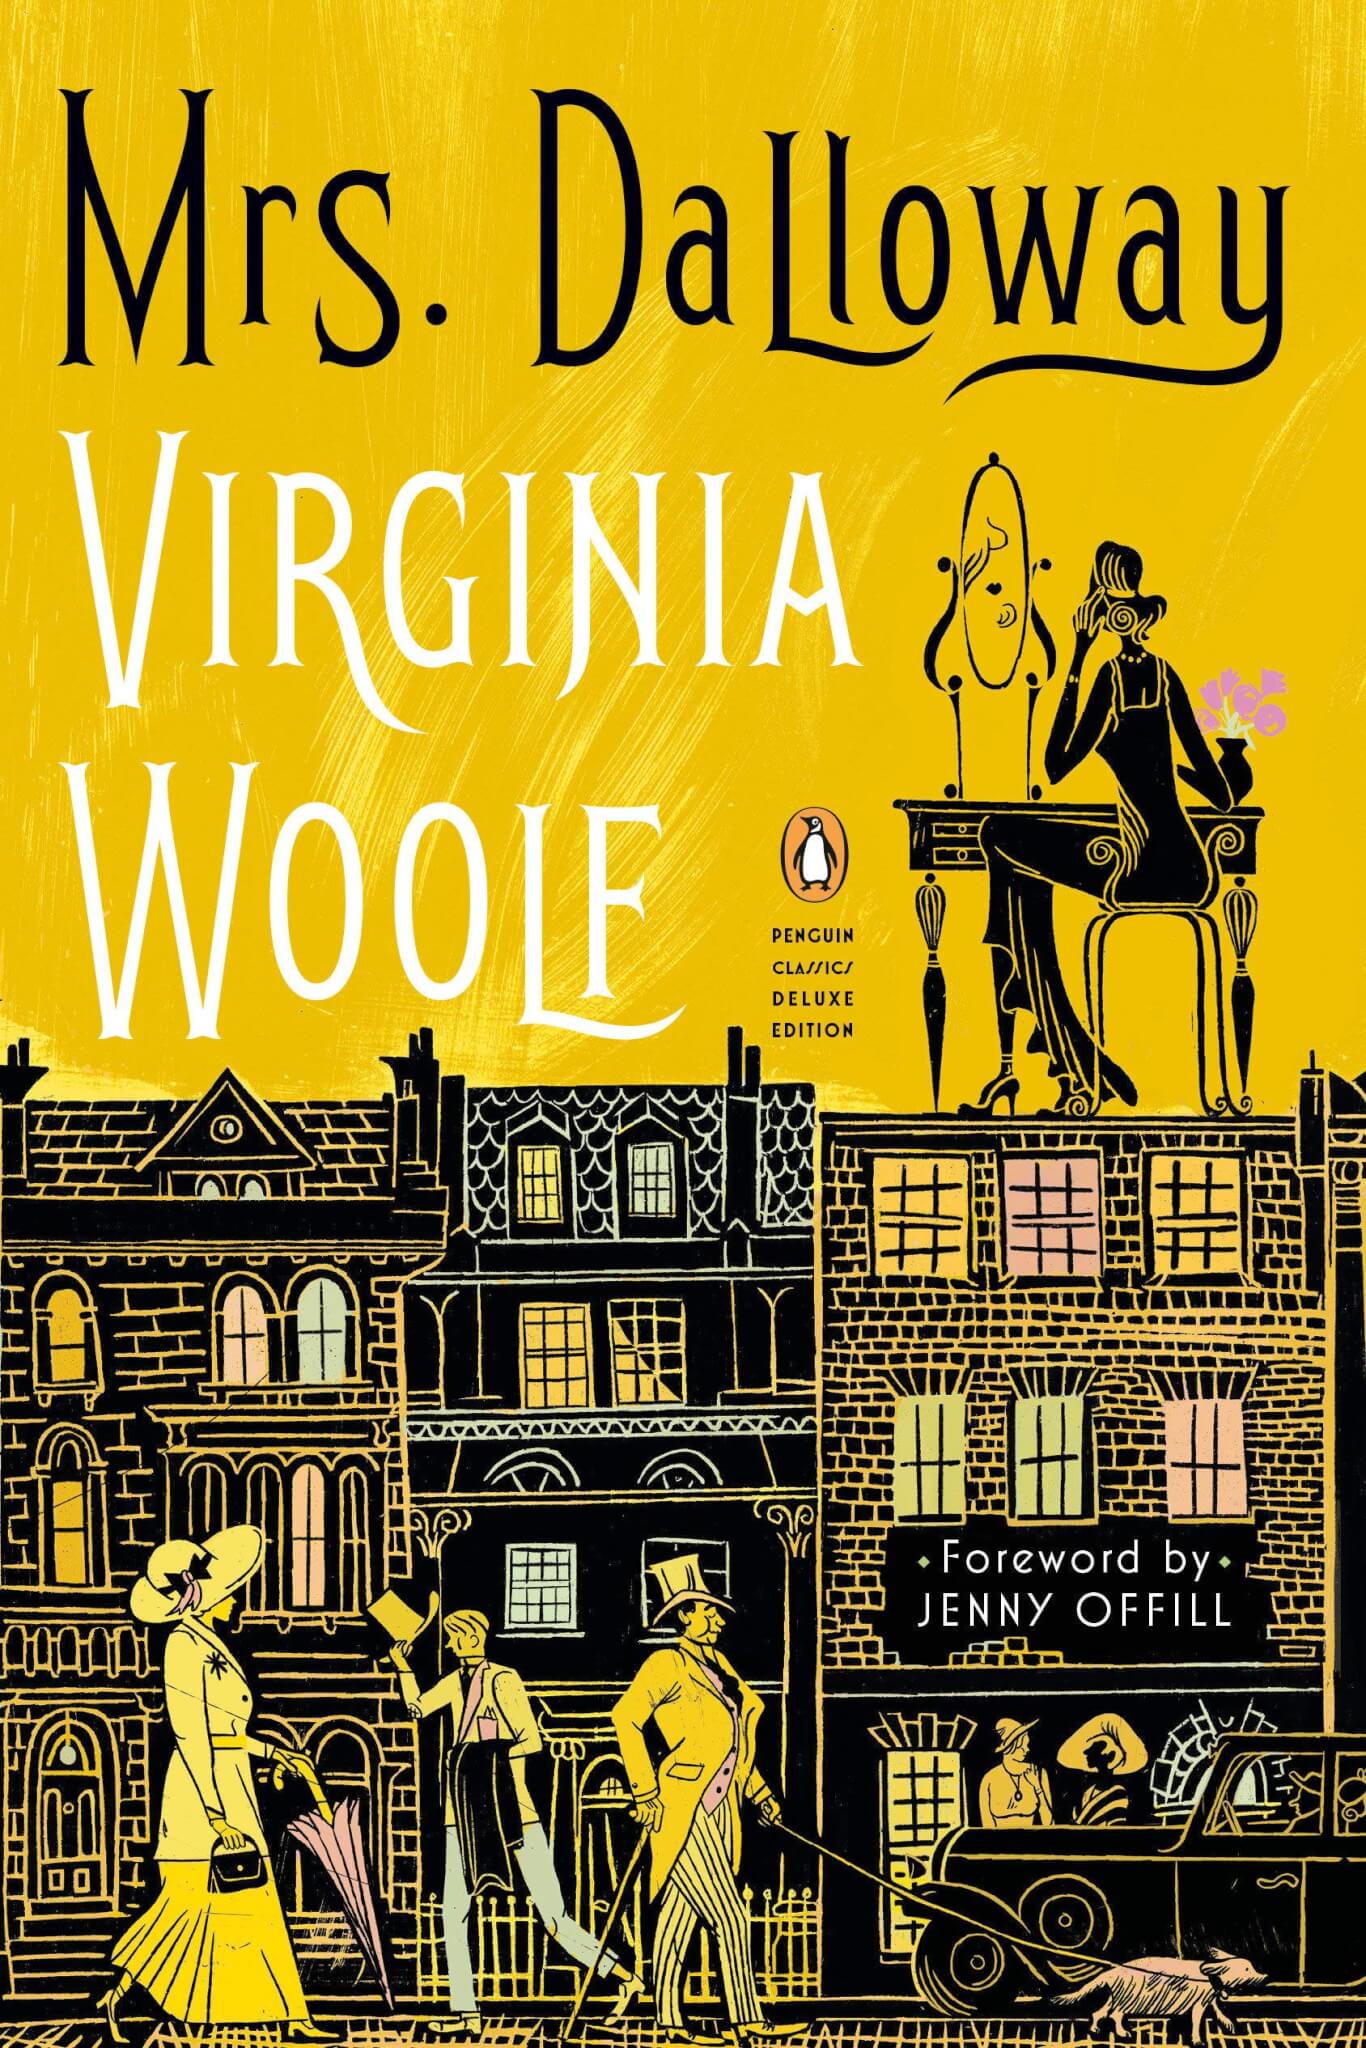 "Mrs. Dalloway" by Virginia Woolf